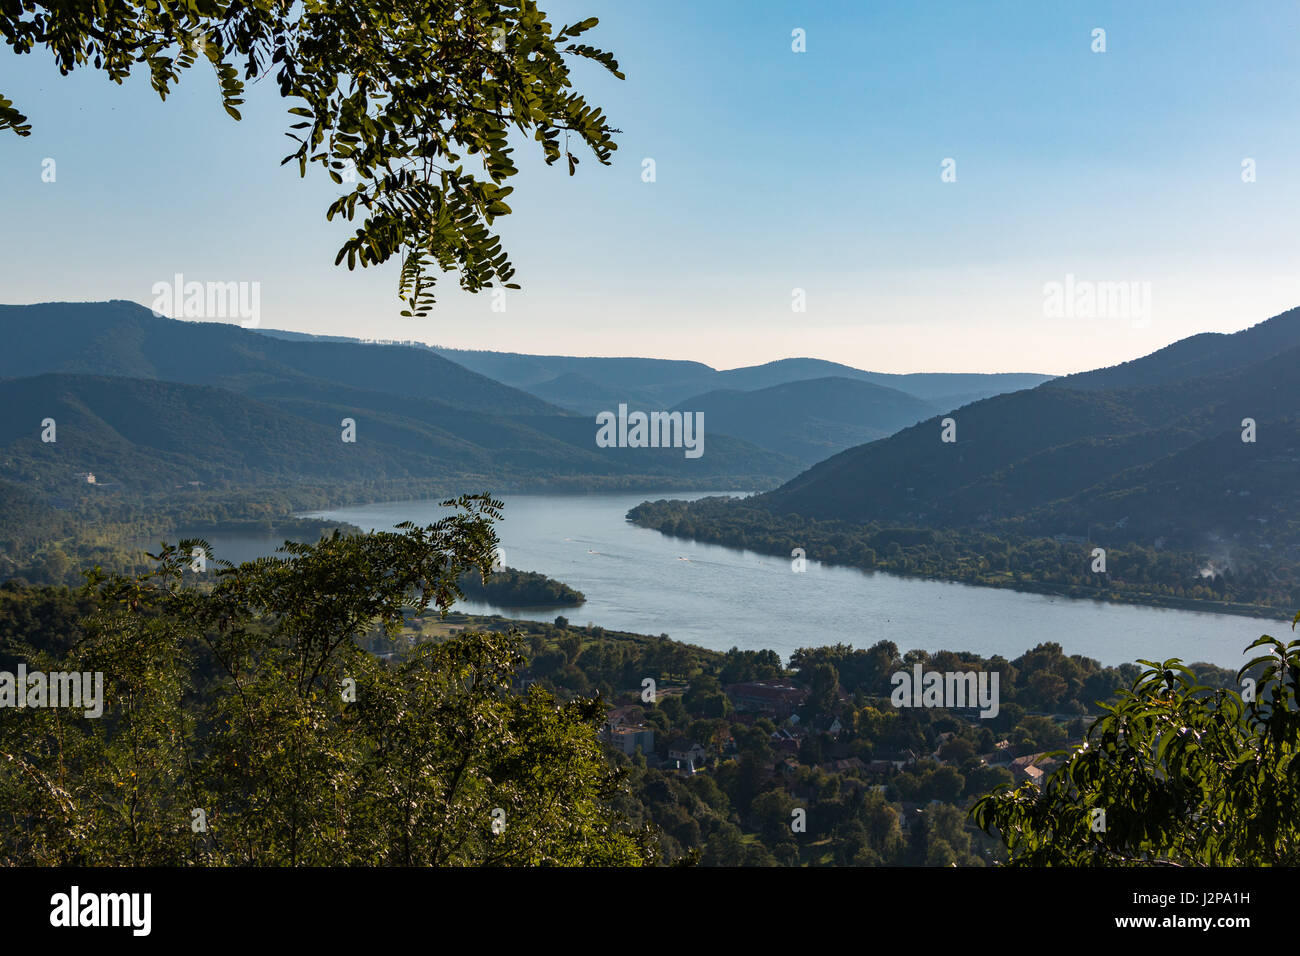 The Danube Bend by Visegrád in Hungary Stock Photo